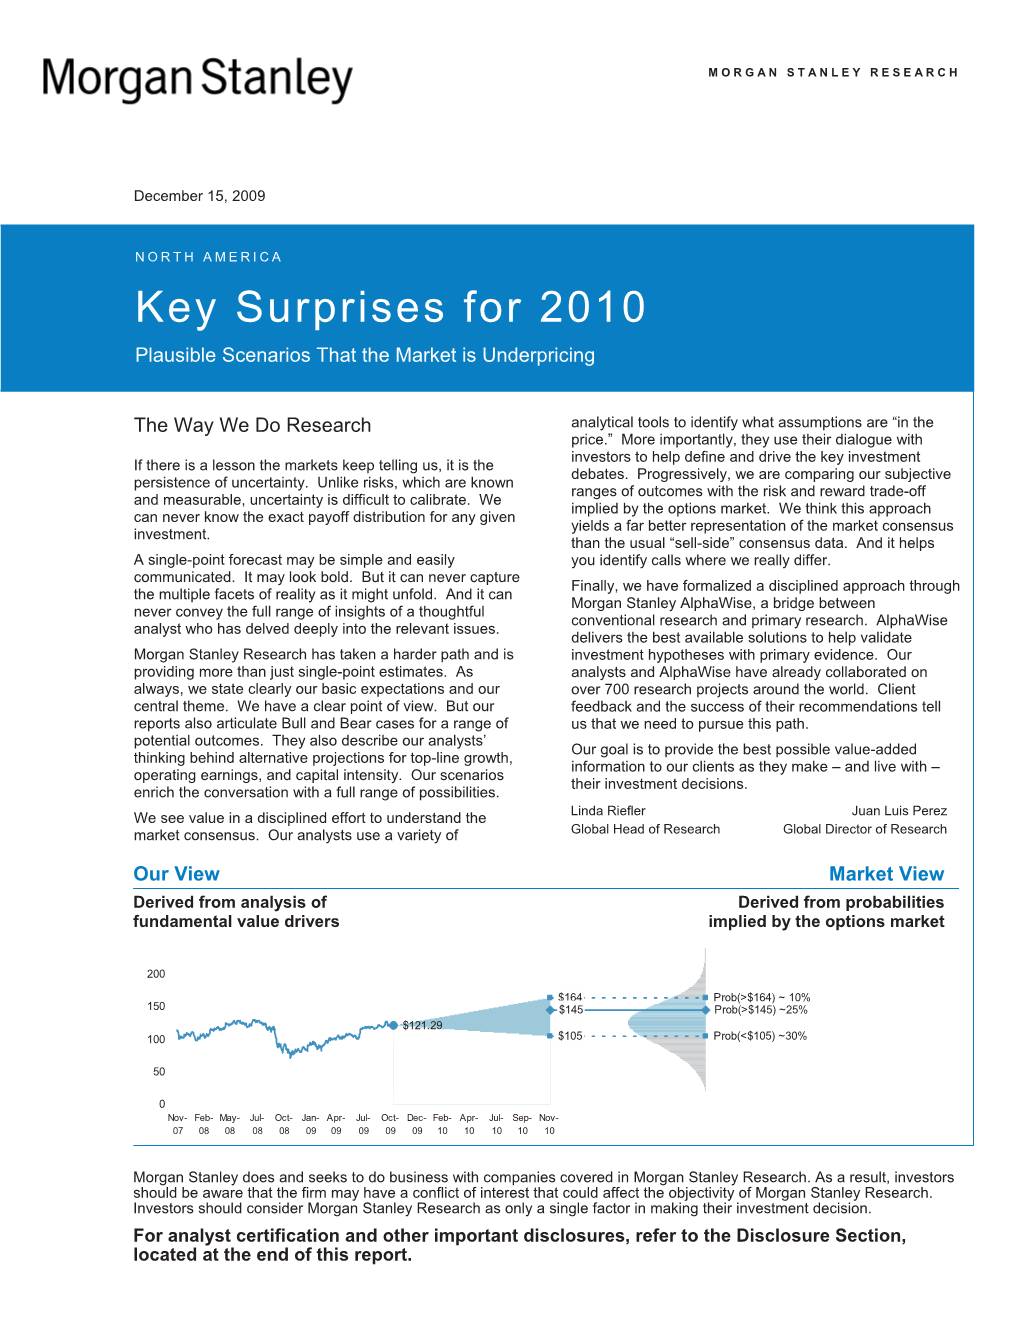 Key Surprises for 2010 Plausible Scenarios That the Market Is Underpricing